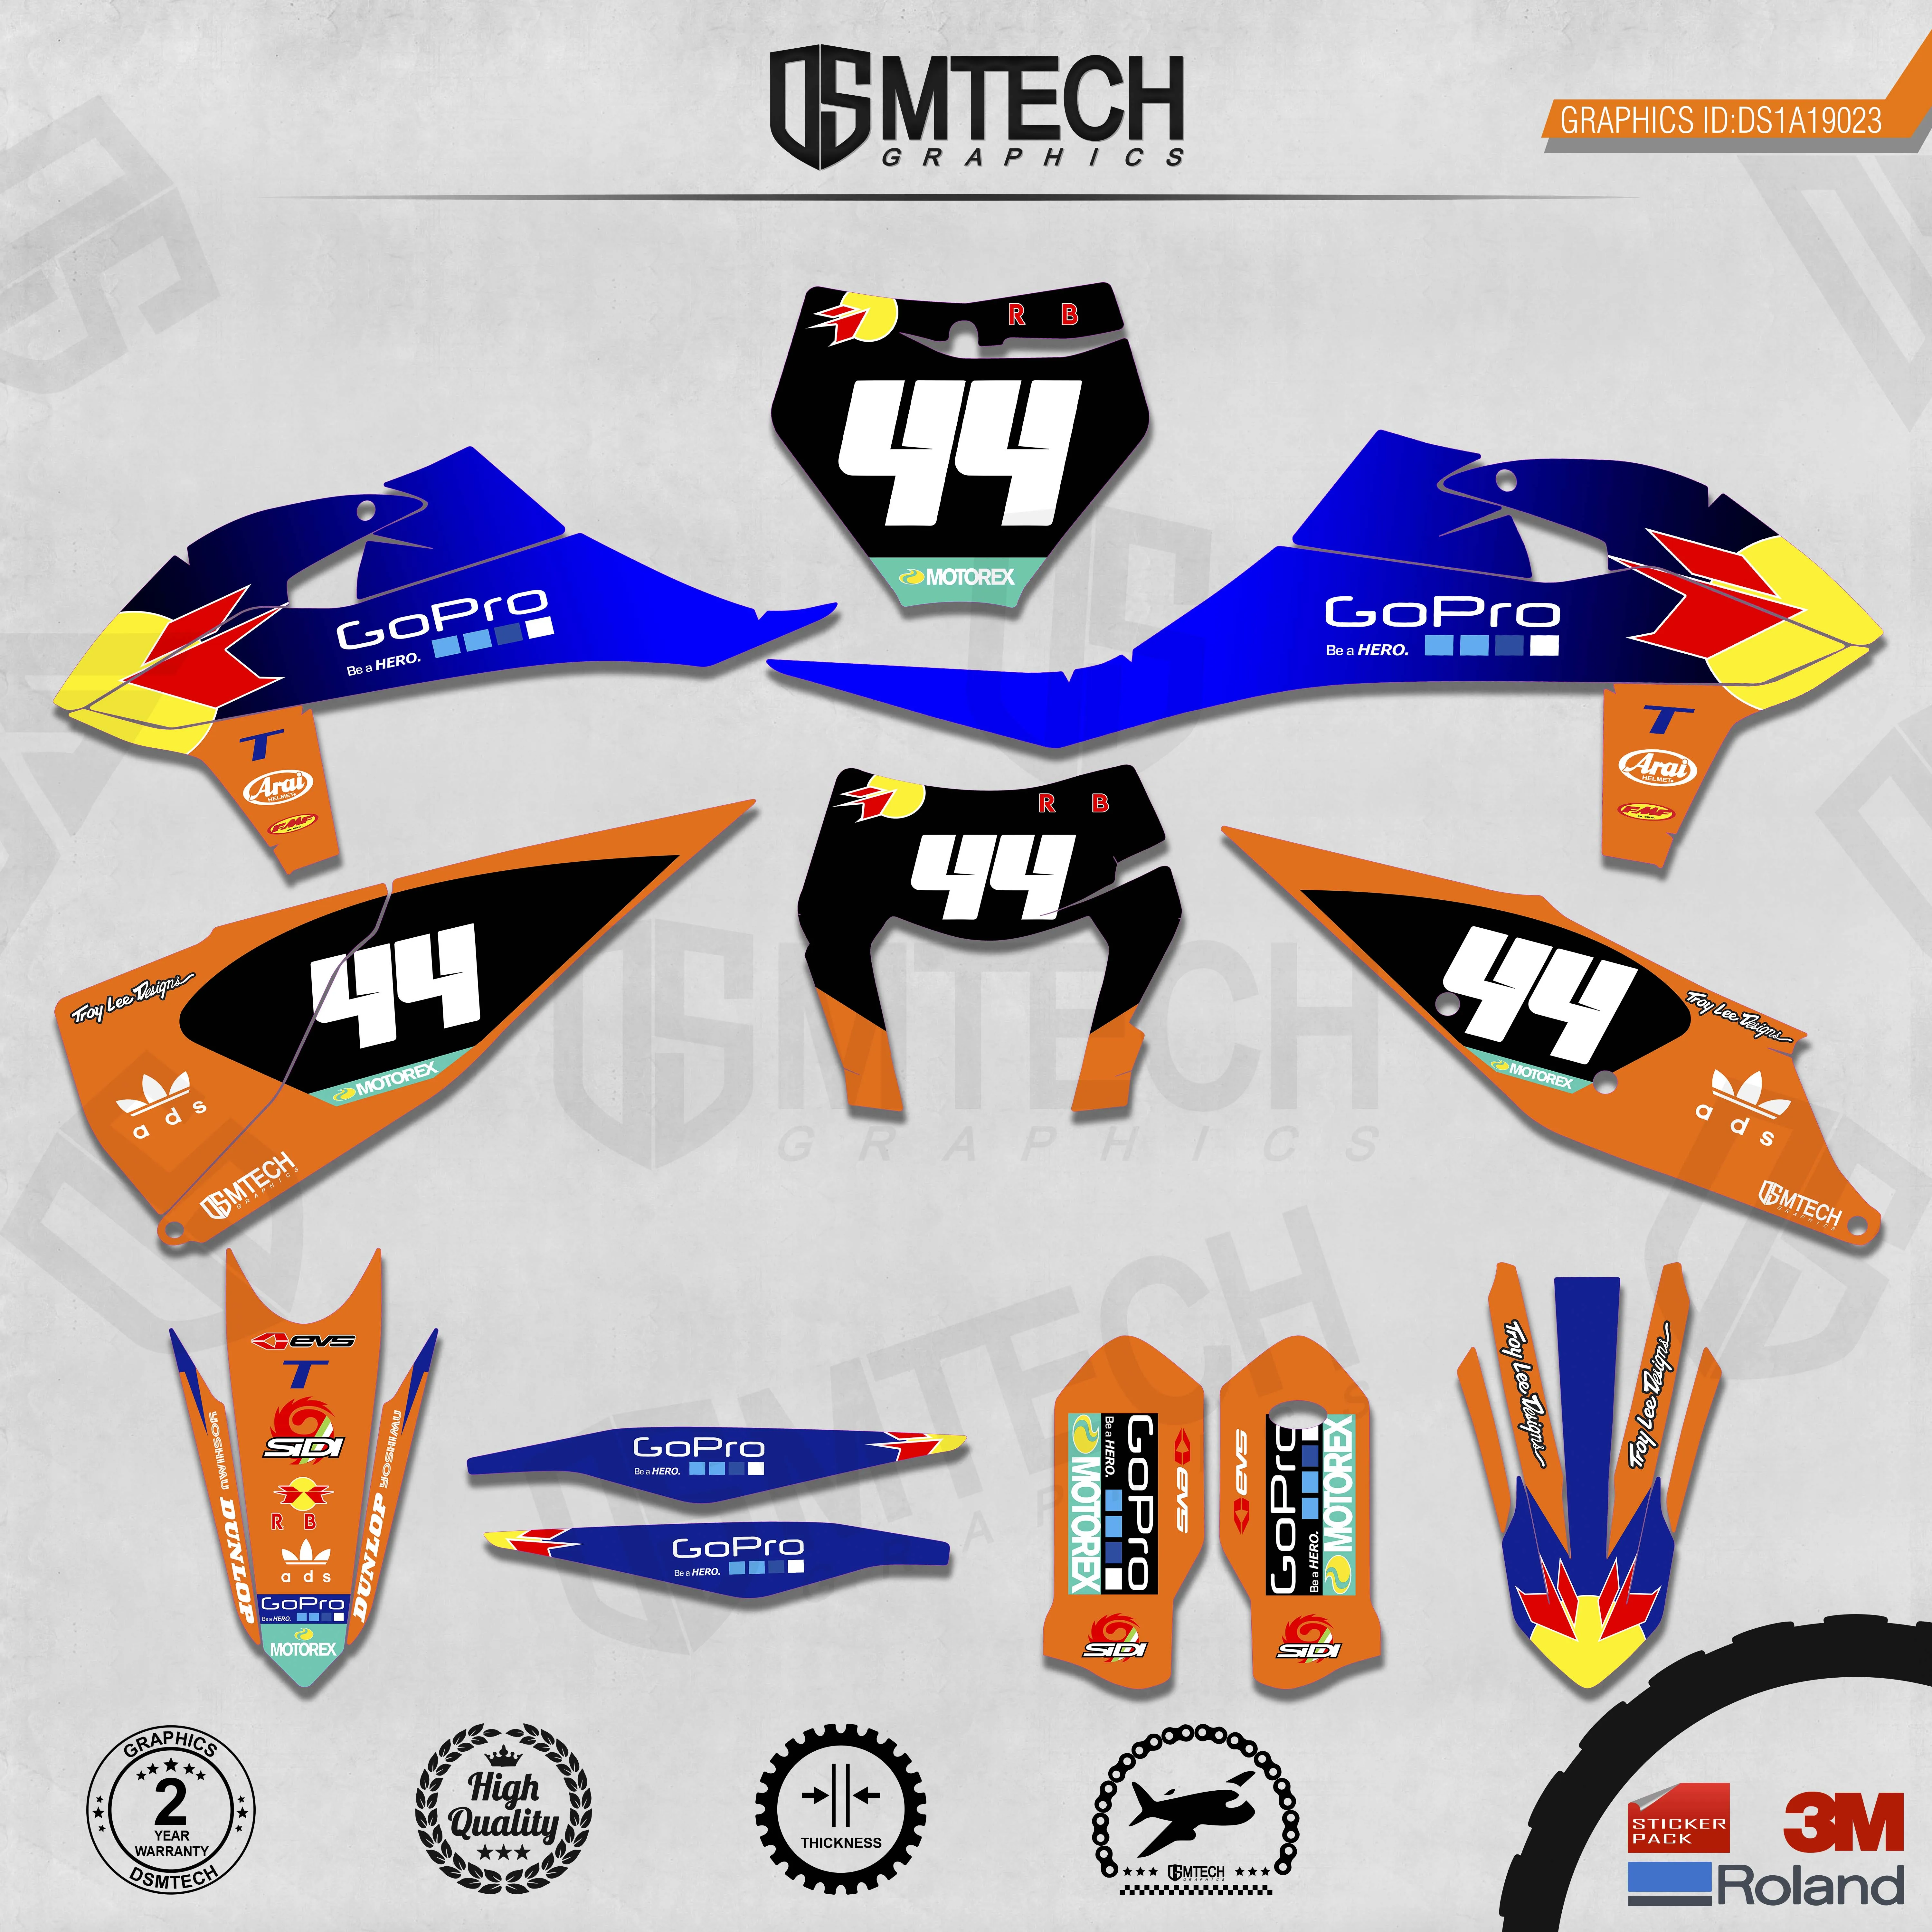 DSMTECH Customized Team Graphics Backgrounds Decals 3M Custom Stickers For 2019-2020 SXF 2020-2021EXC 023